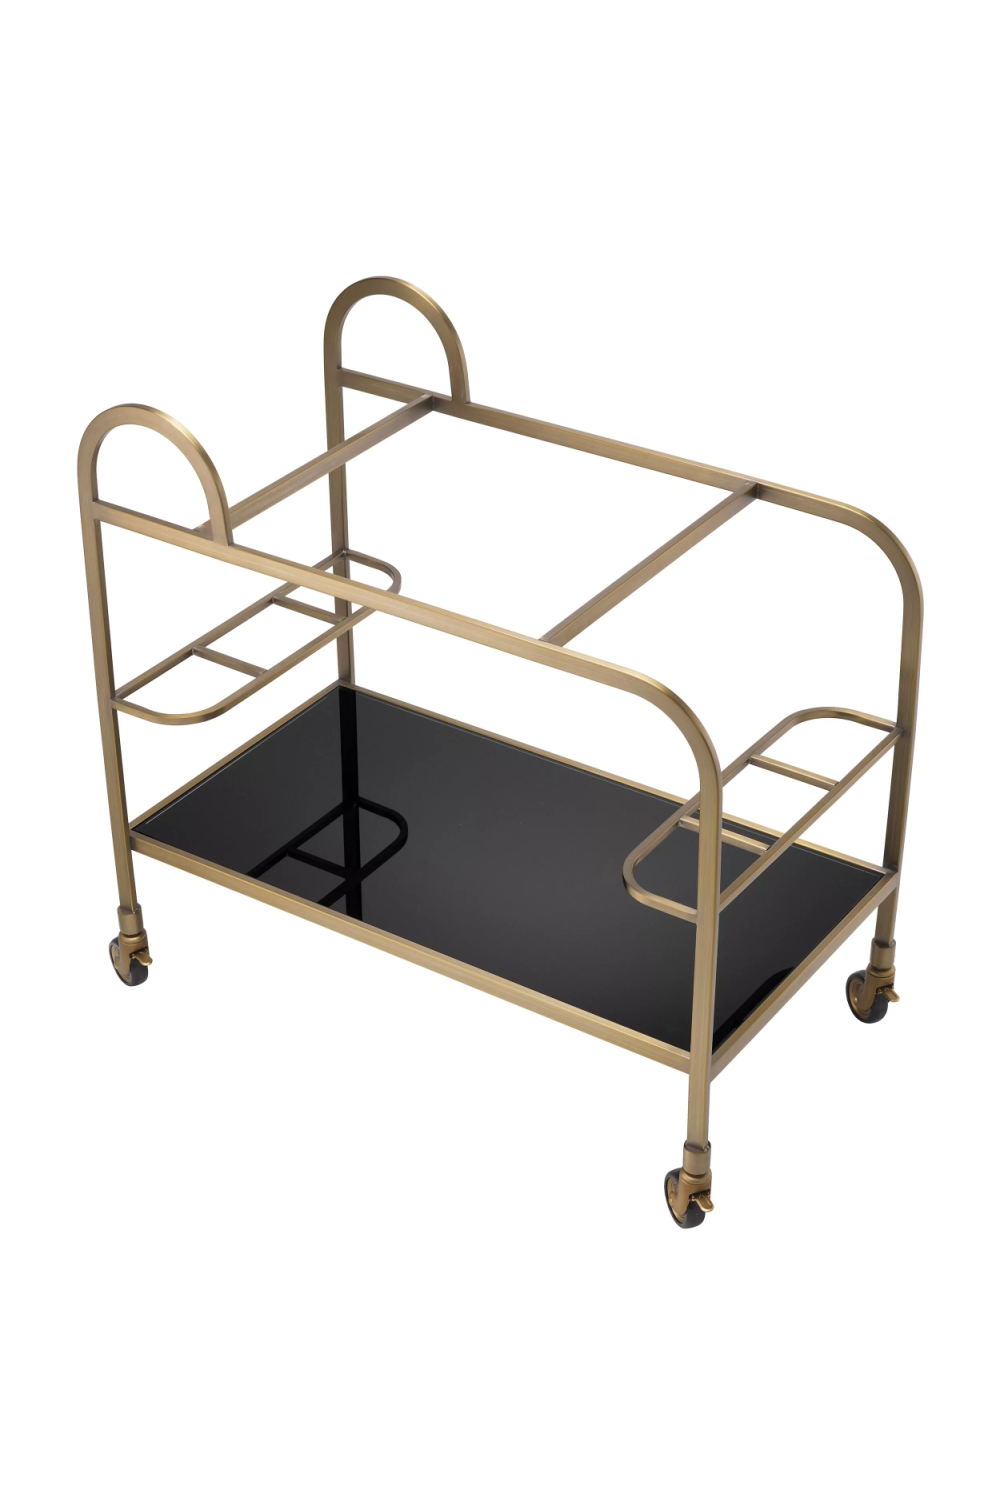 Modern Brushed Brass Trolley | Eichholtz Montreuil | OROA.com